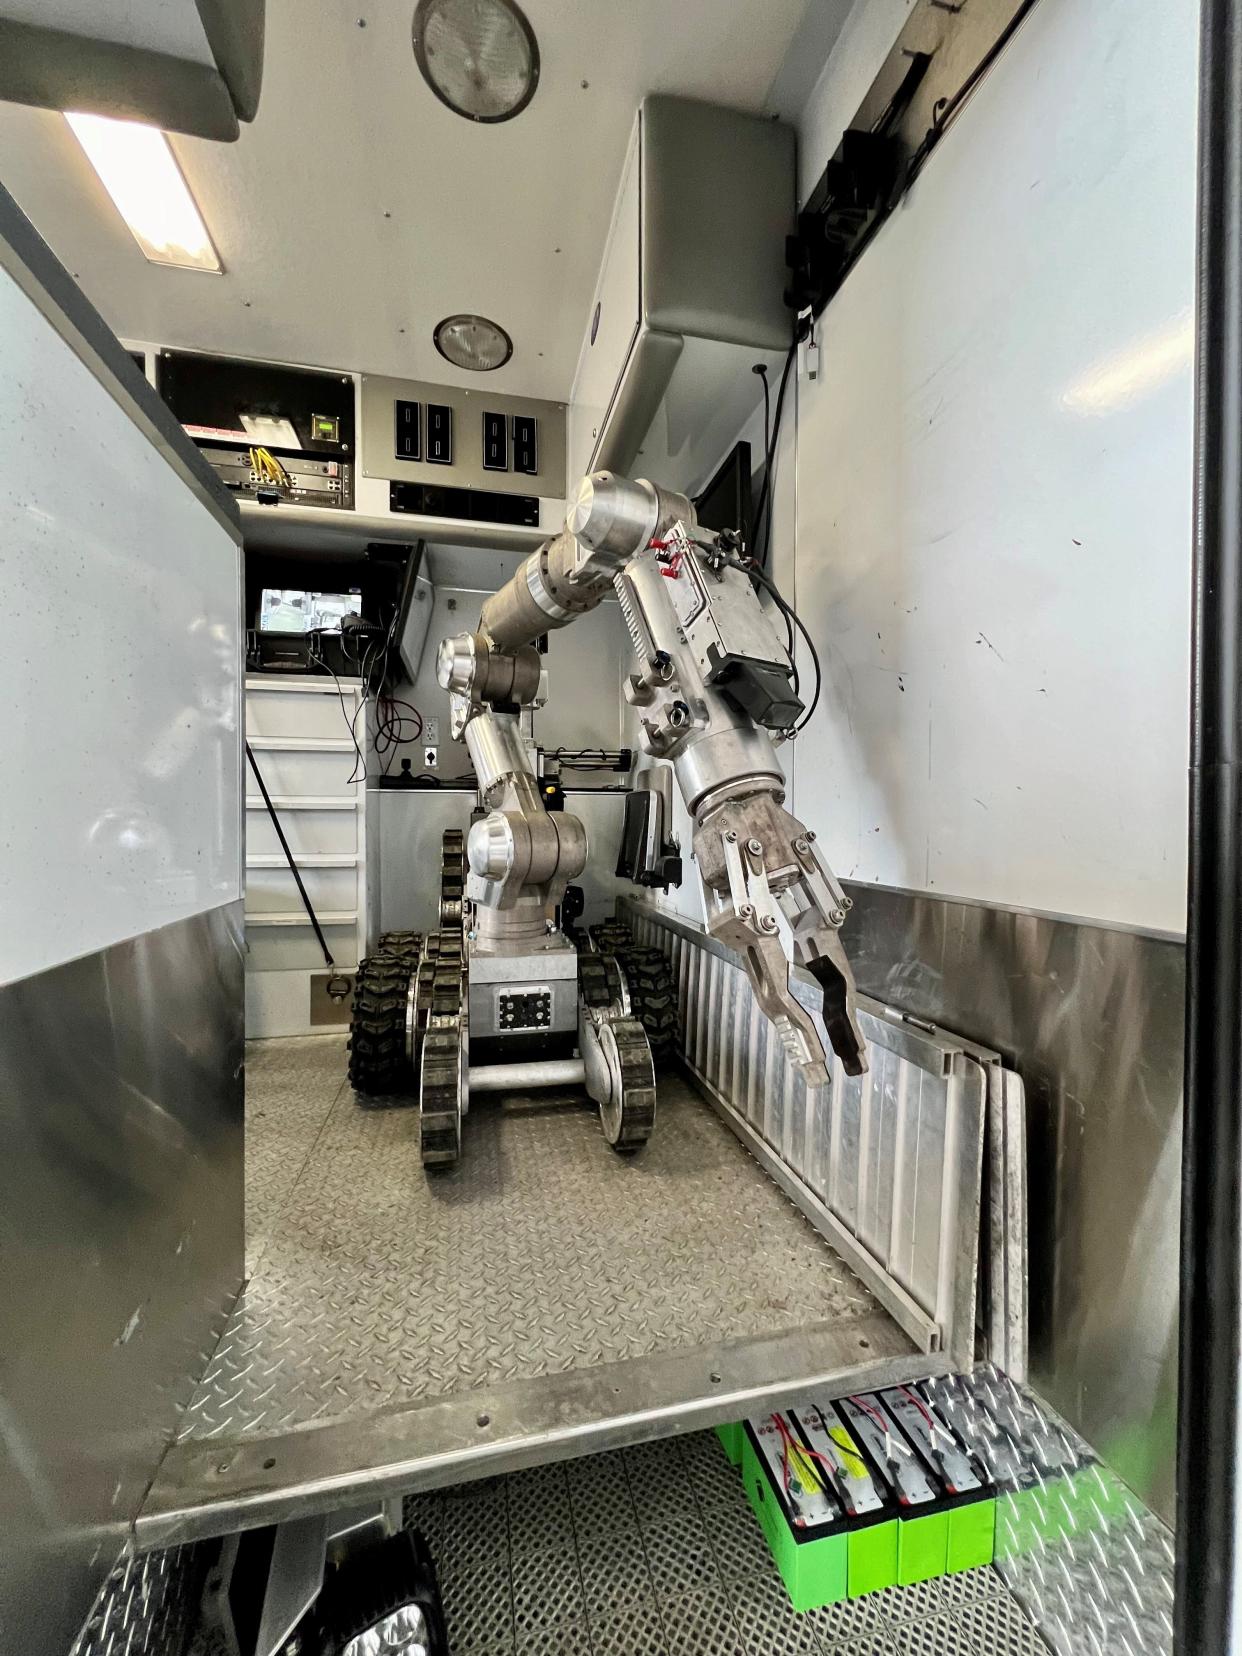 The Salem bomb squad's Spartan robot partially blocks the doorway of its response vehicle. The 530-pound bomb disposal robot has to be offloaded over the steps using the portable aluminum ramps leaning against the wall.